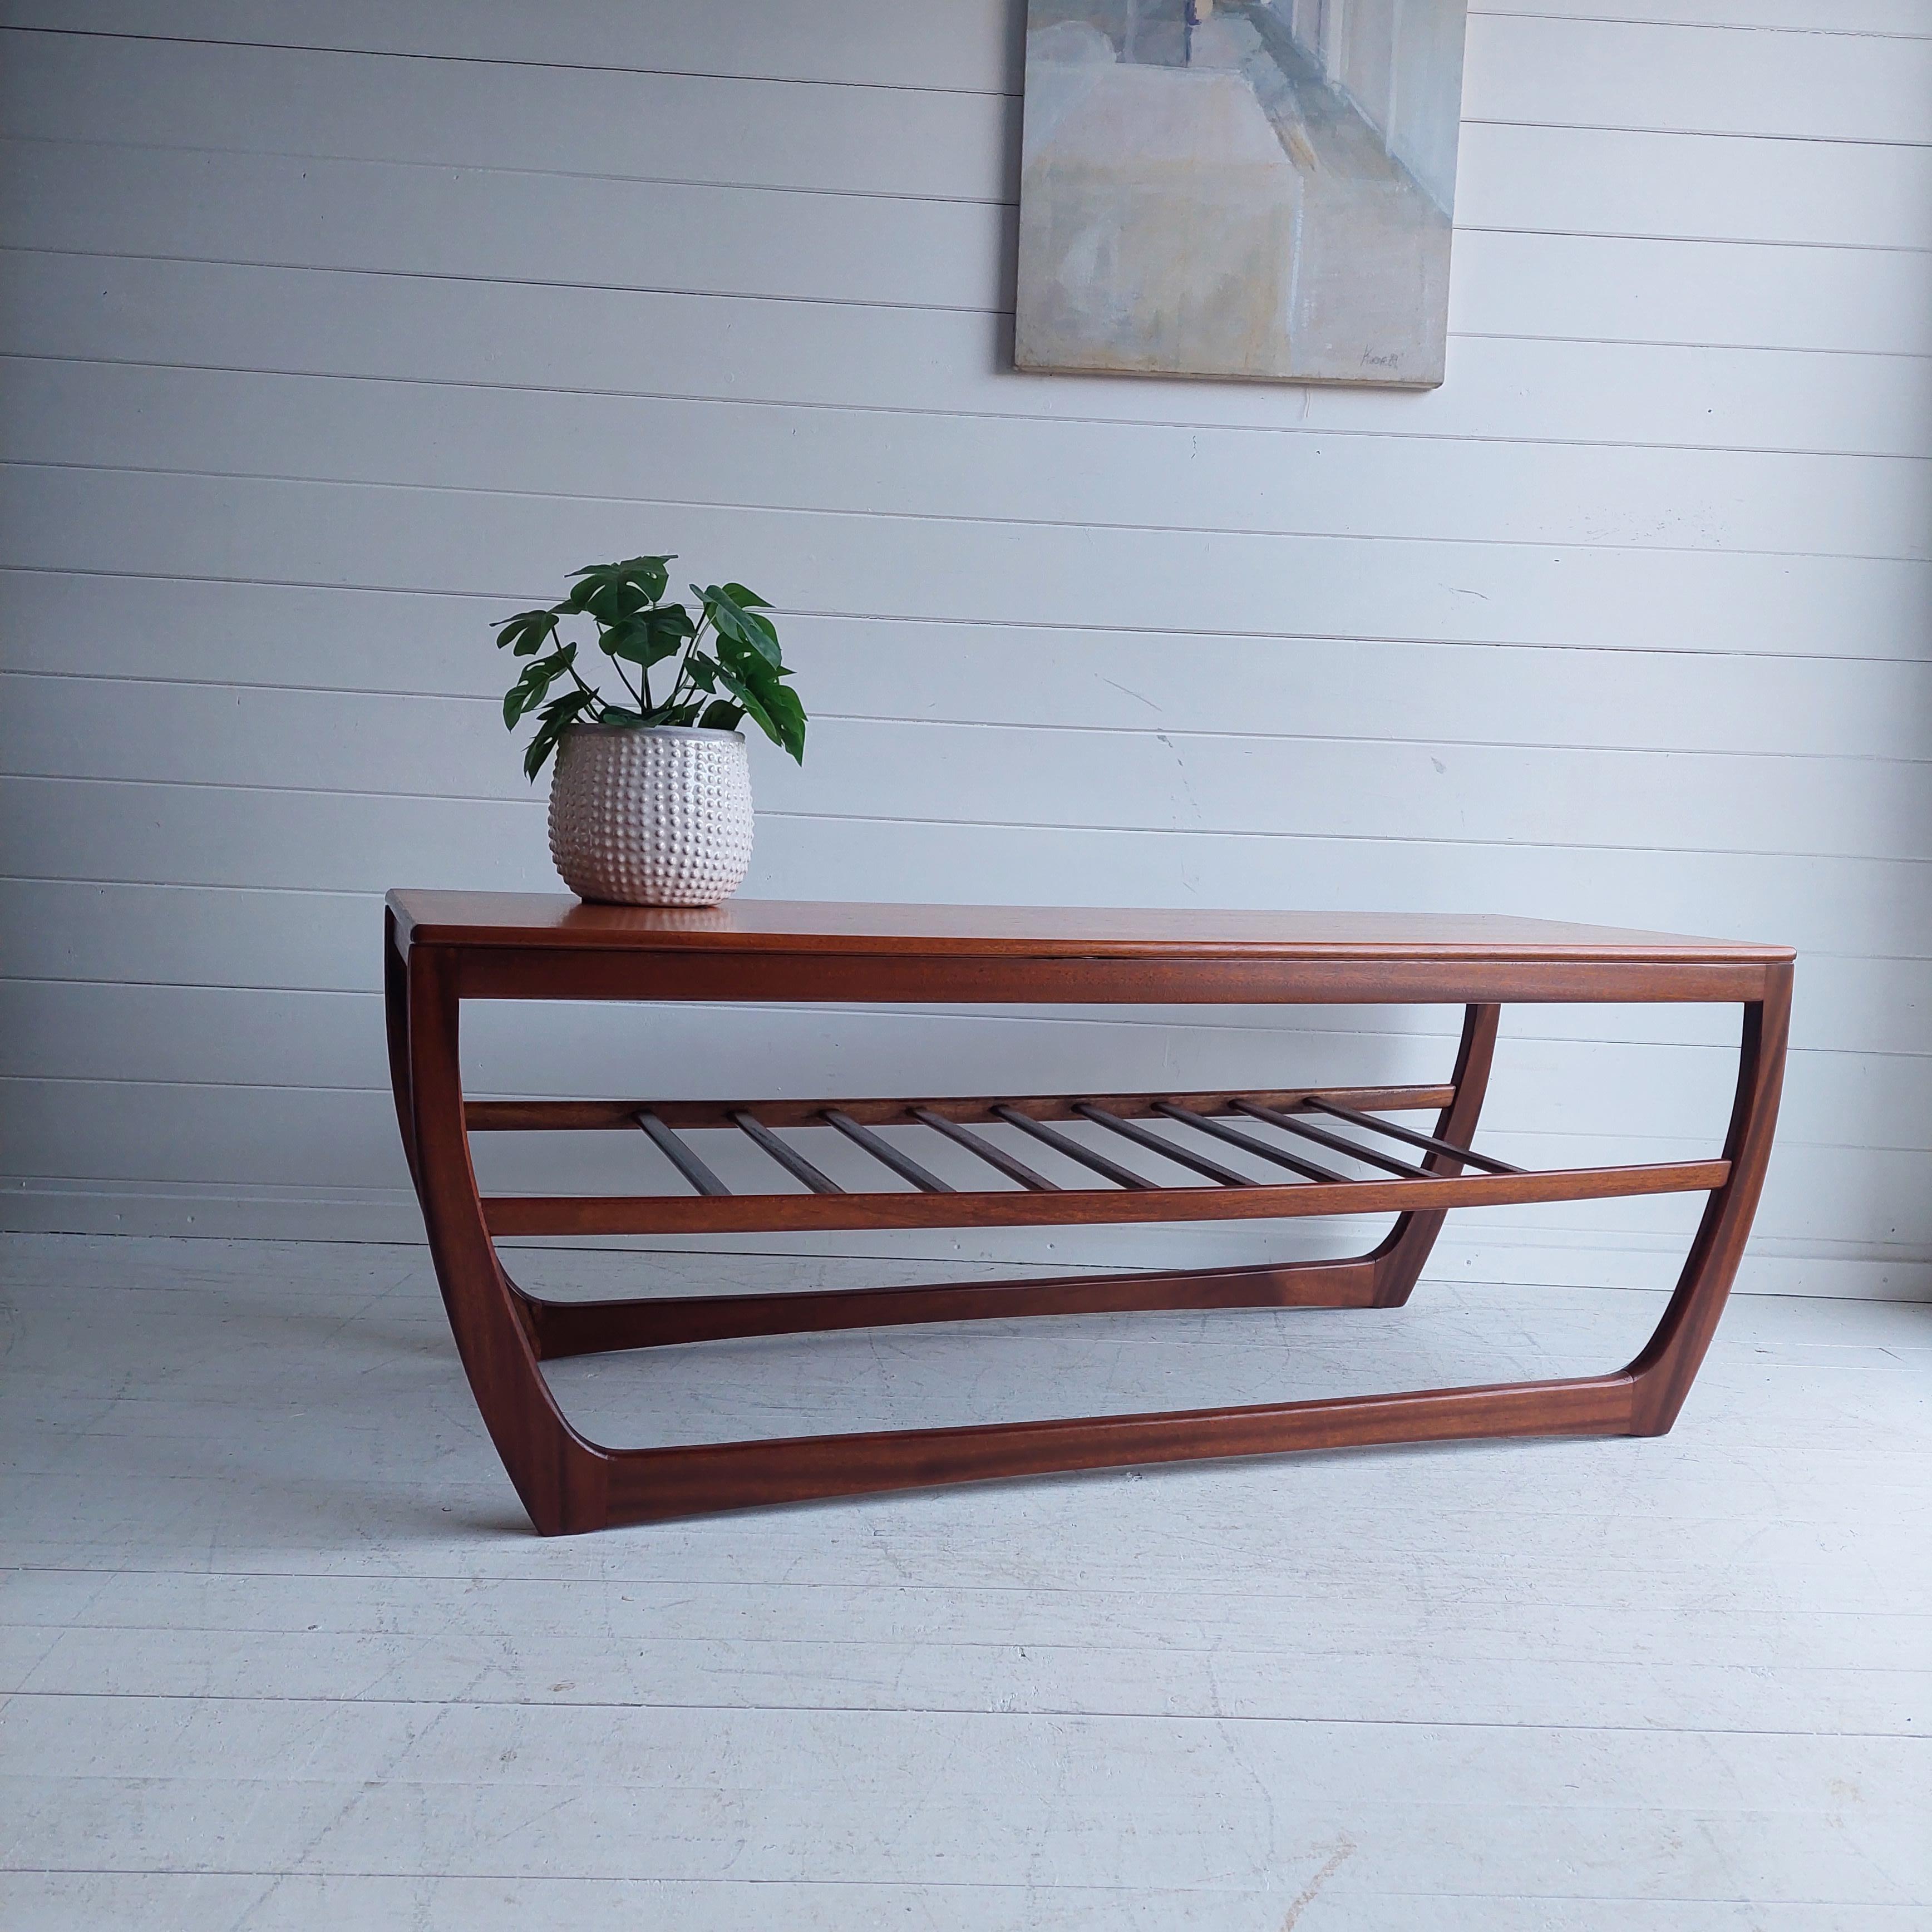 A stylish and practical vintage teak and afromosia coffee table by Beithcraft Furniture of Scotland.

Stunning and rare coffee table made in Uk during the 60s
Afromosia frame and under shelf with a nice teak top
The shape is just unique.
Sleight